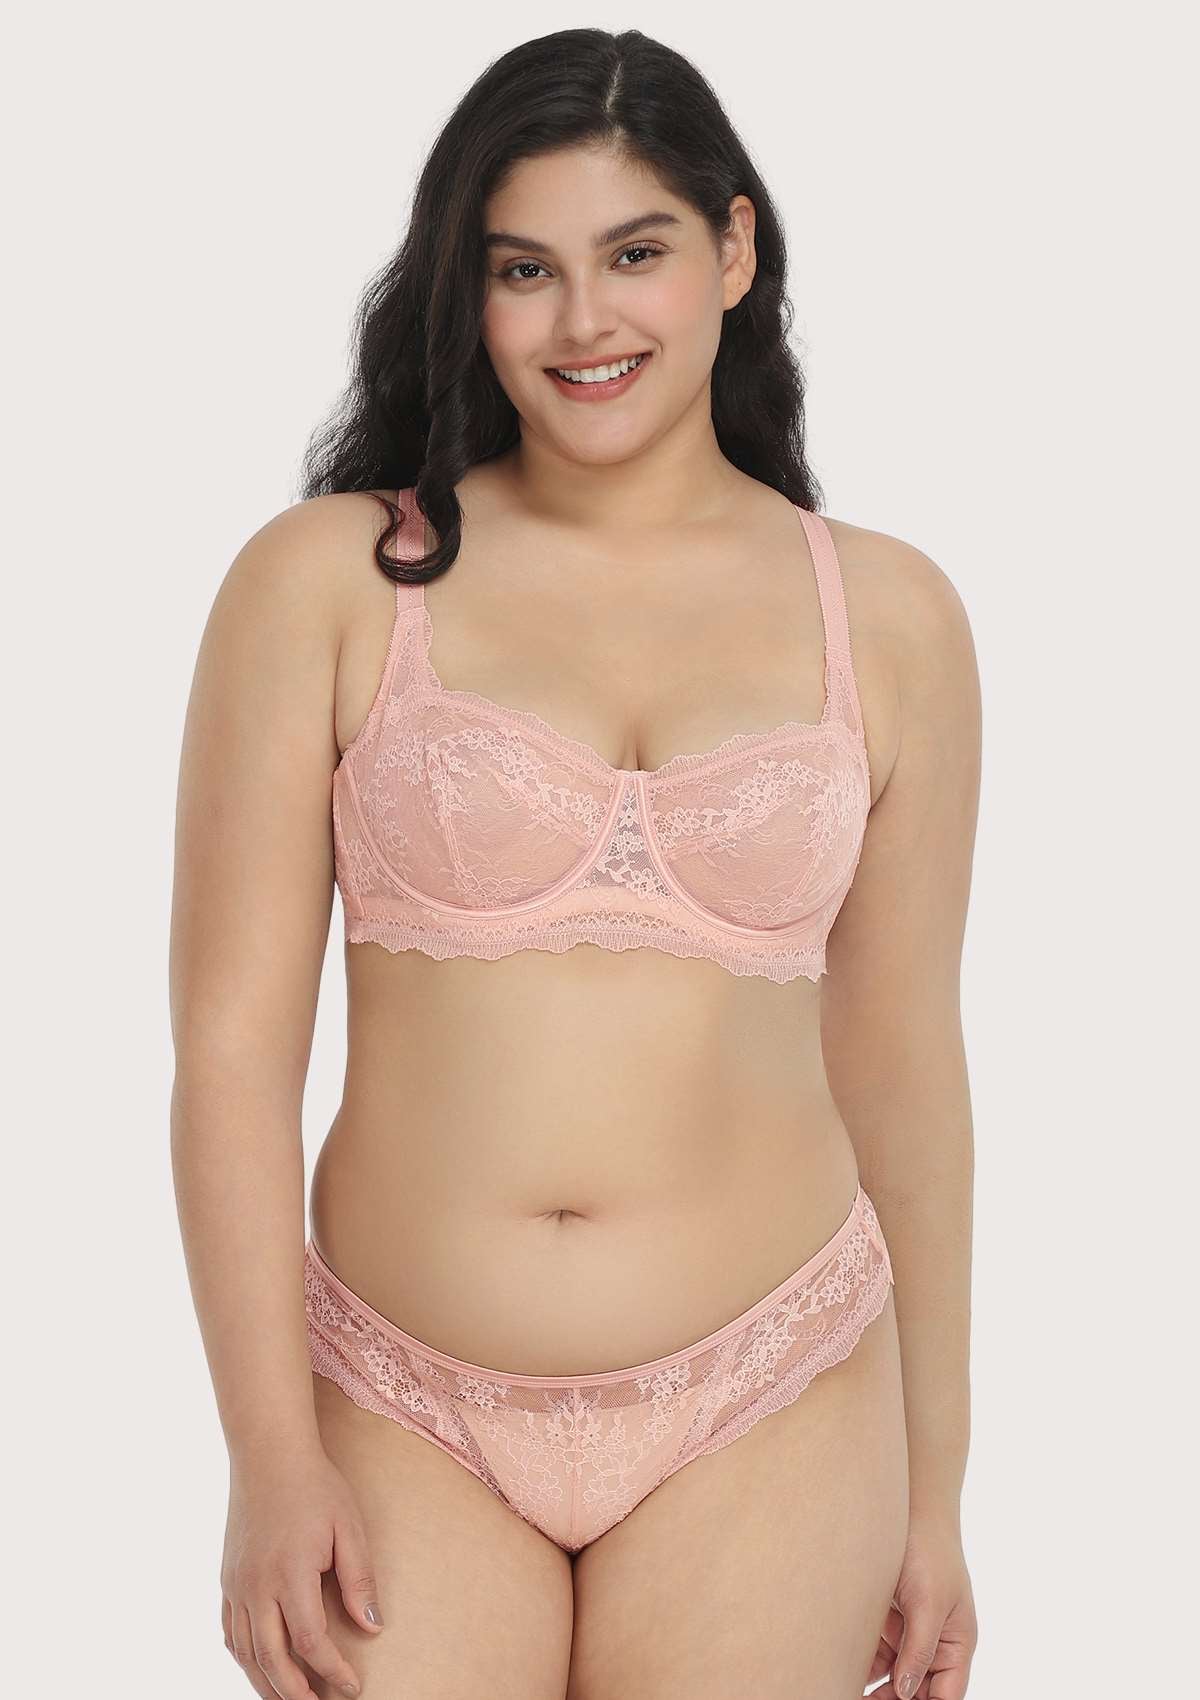 HSIA Floral Lace Unlined Bridal Balconette Delicate Bra Panty Set - Pink / 36 / DDD/F